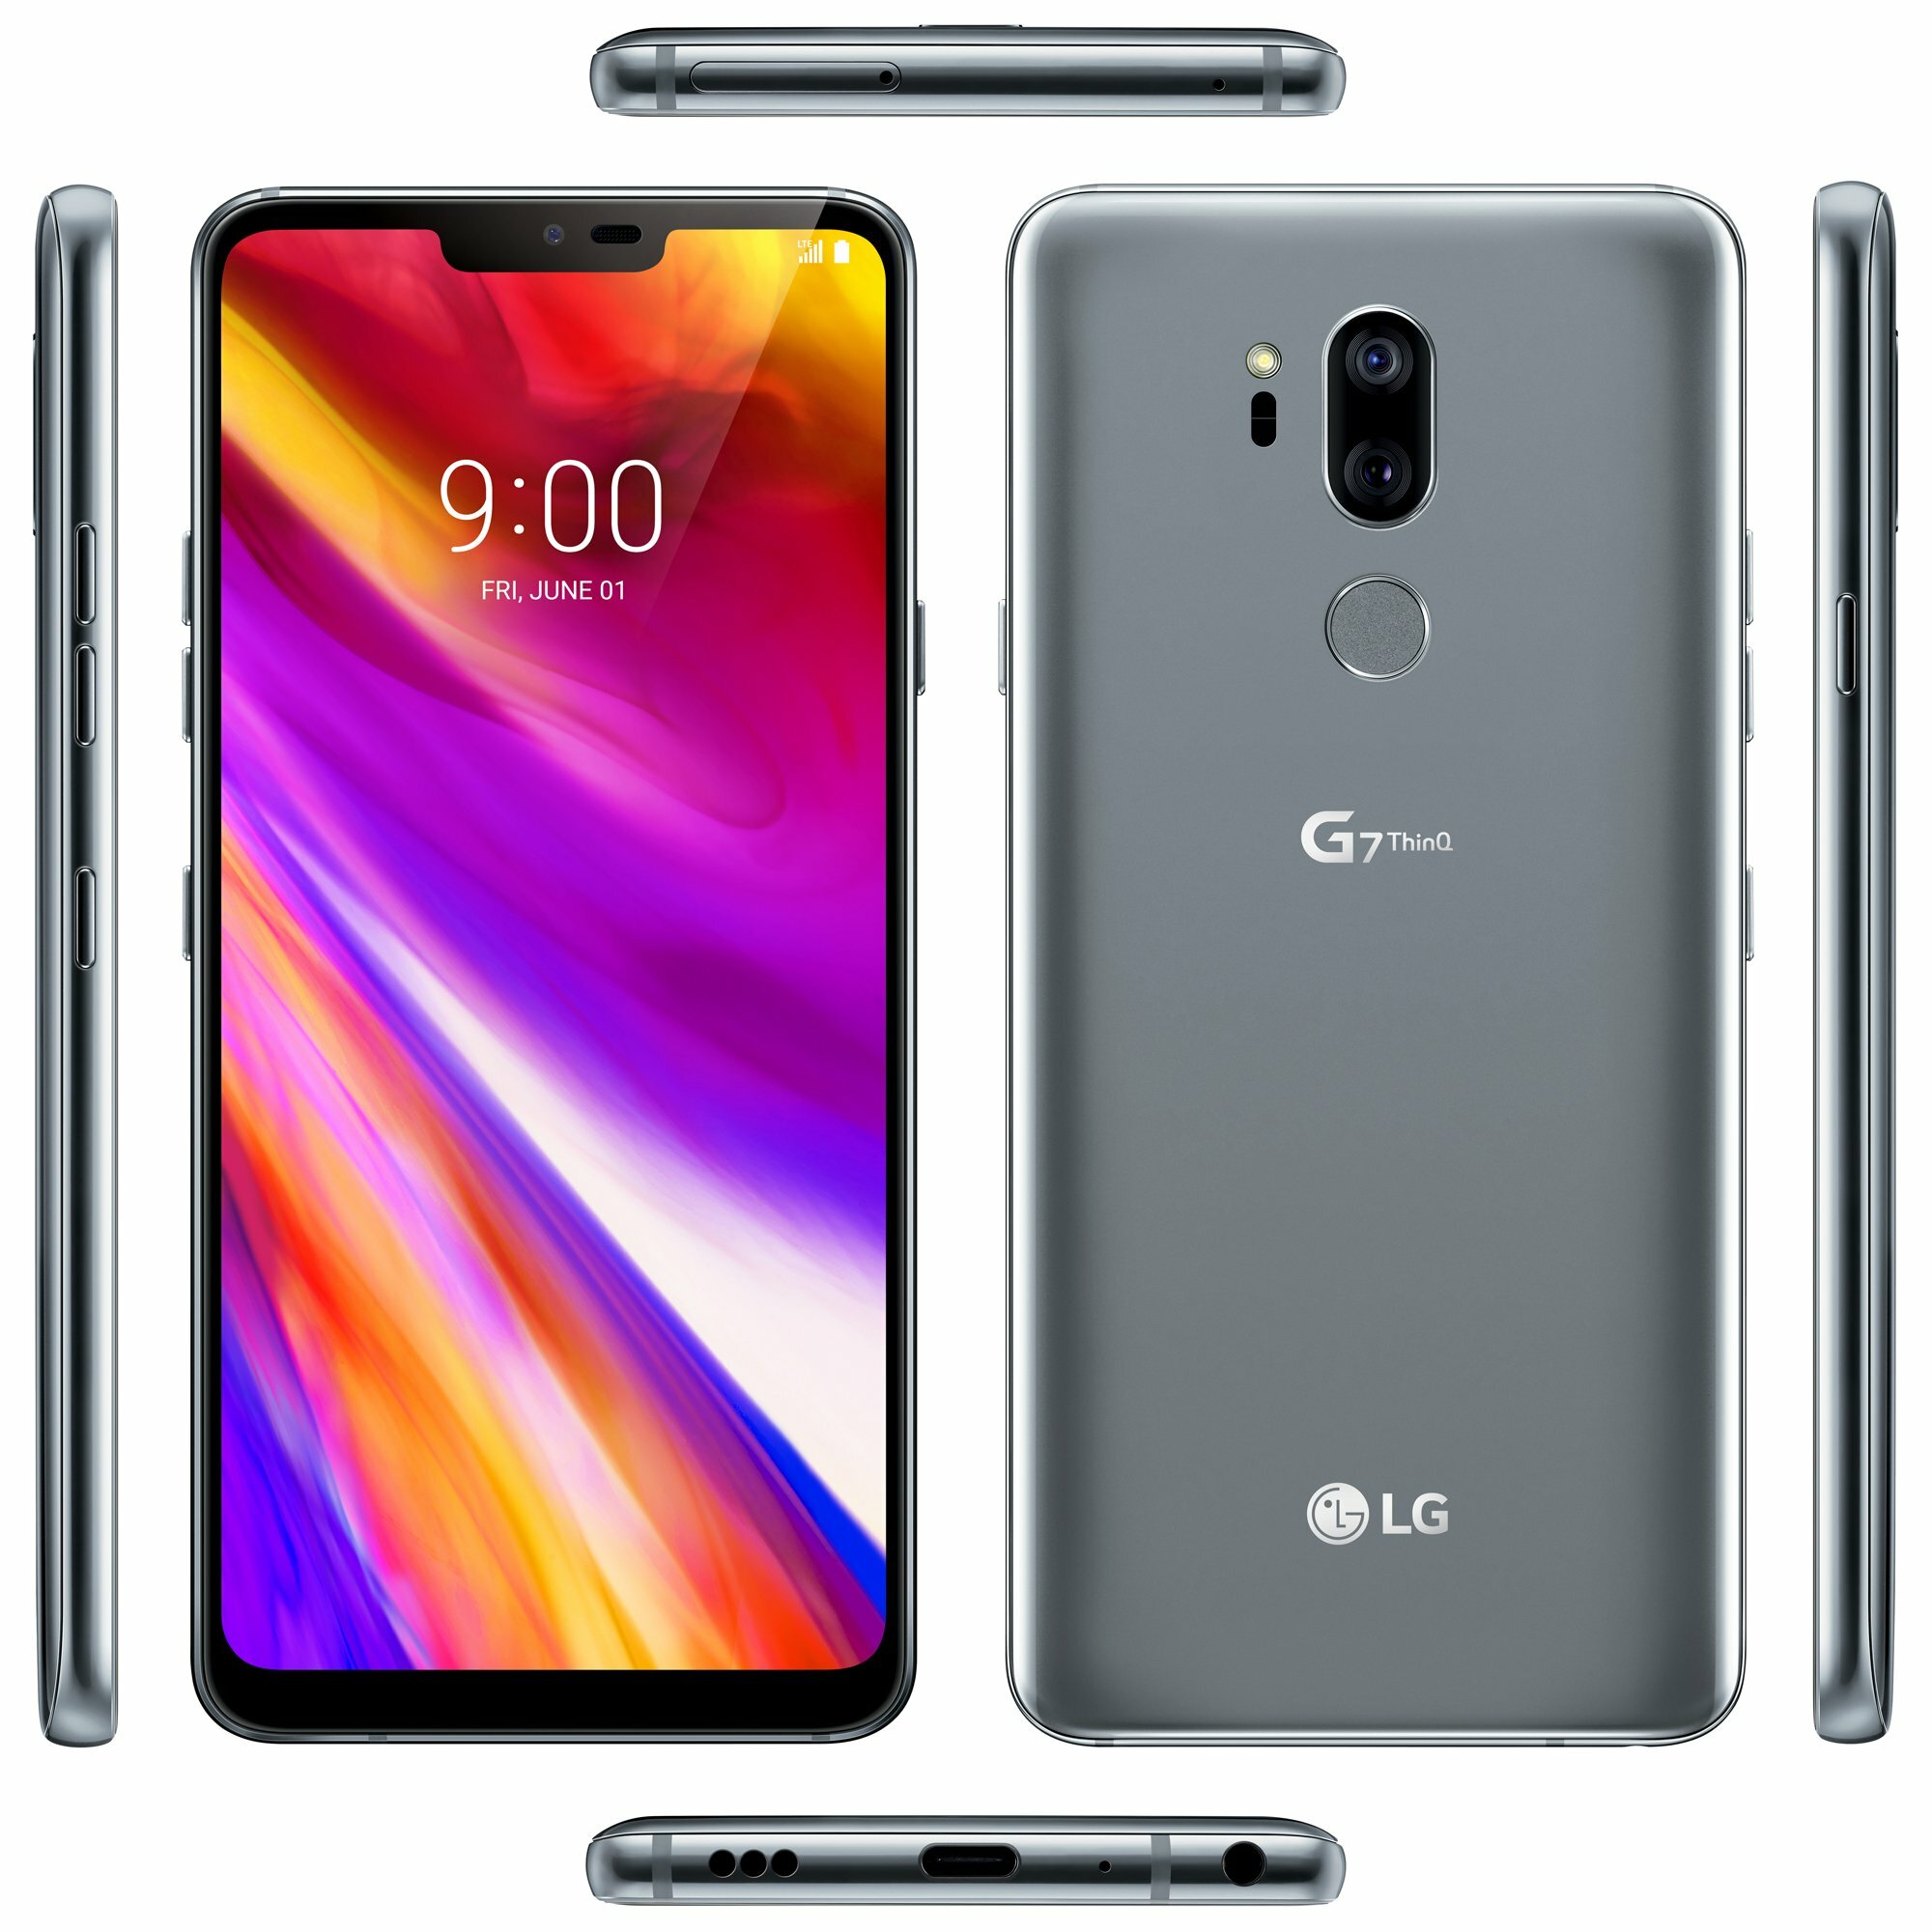 How much power will the LG G7 ThinQ pack?